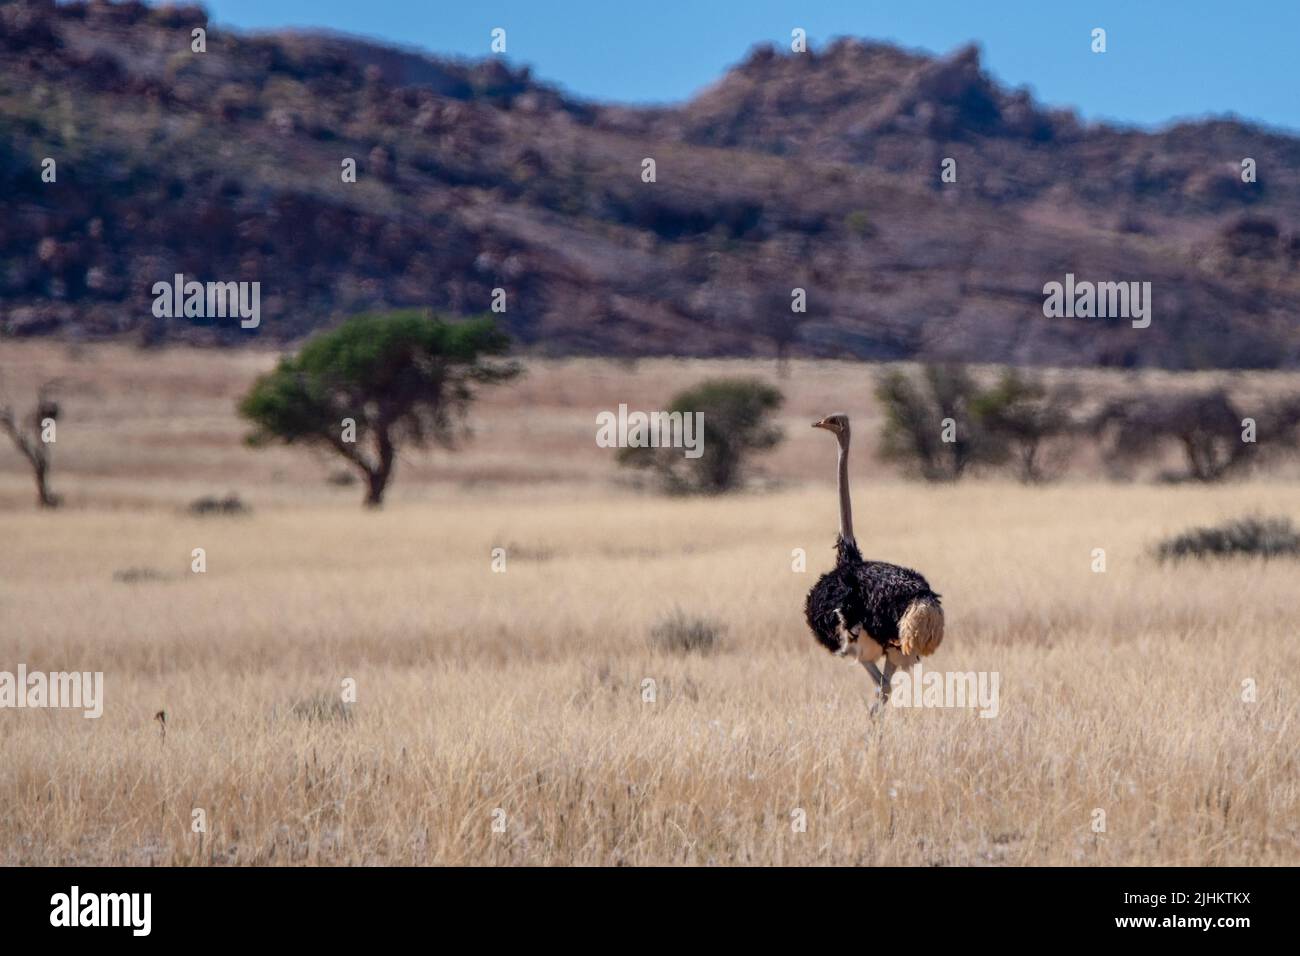 Ostrich on the african savannah Stock Photo